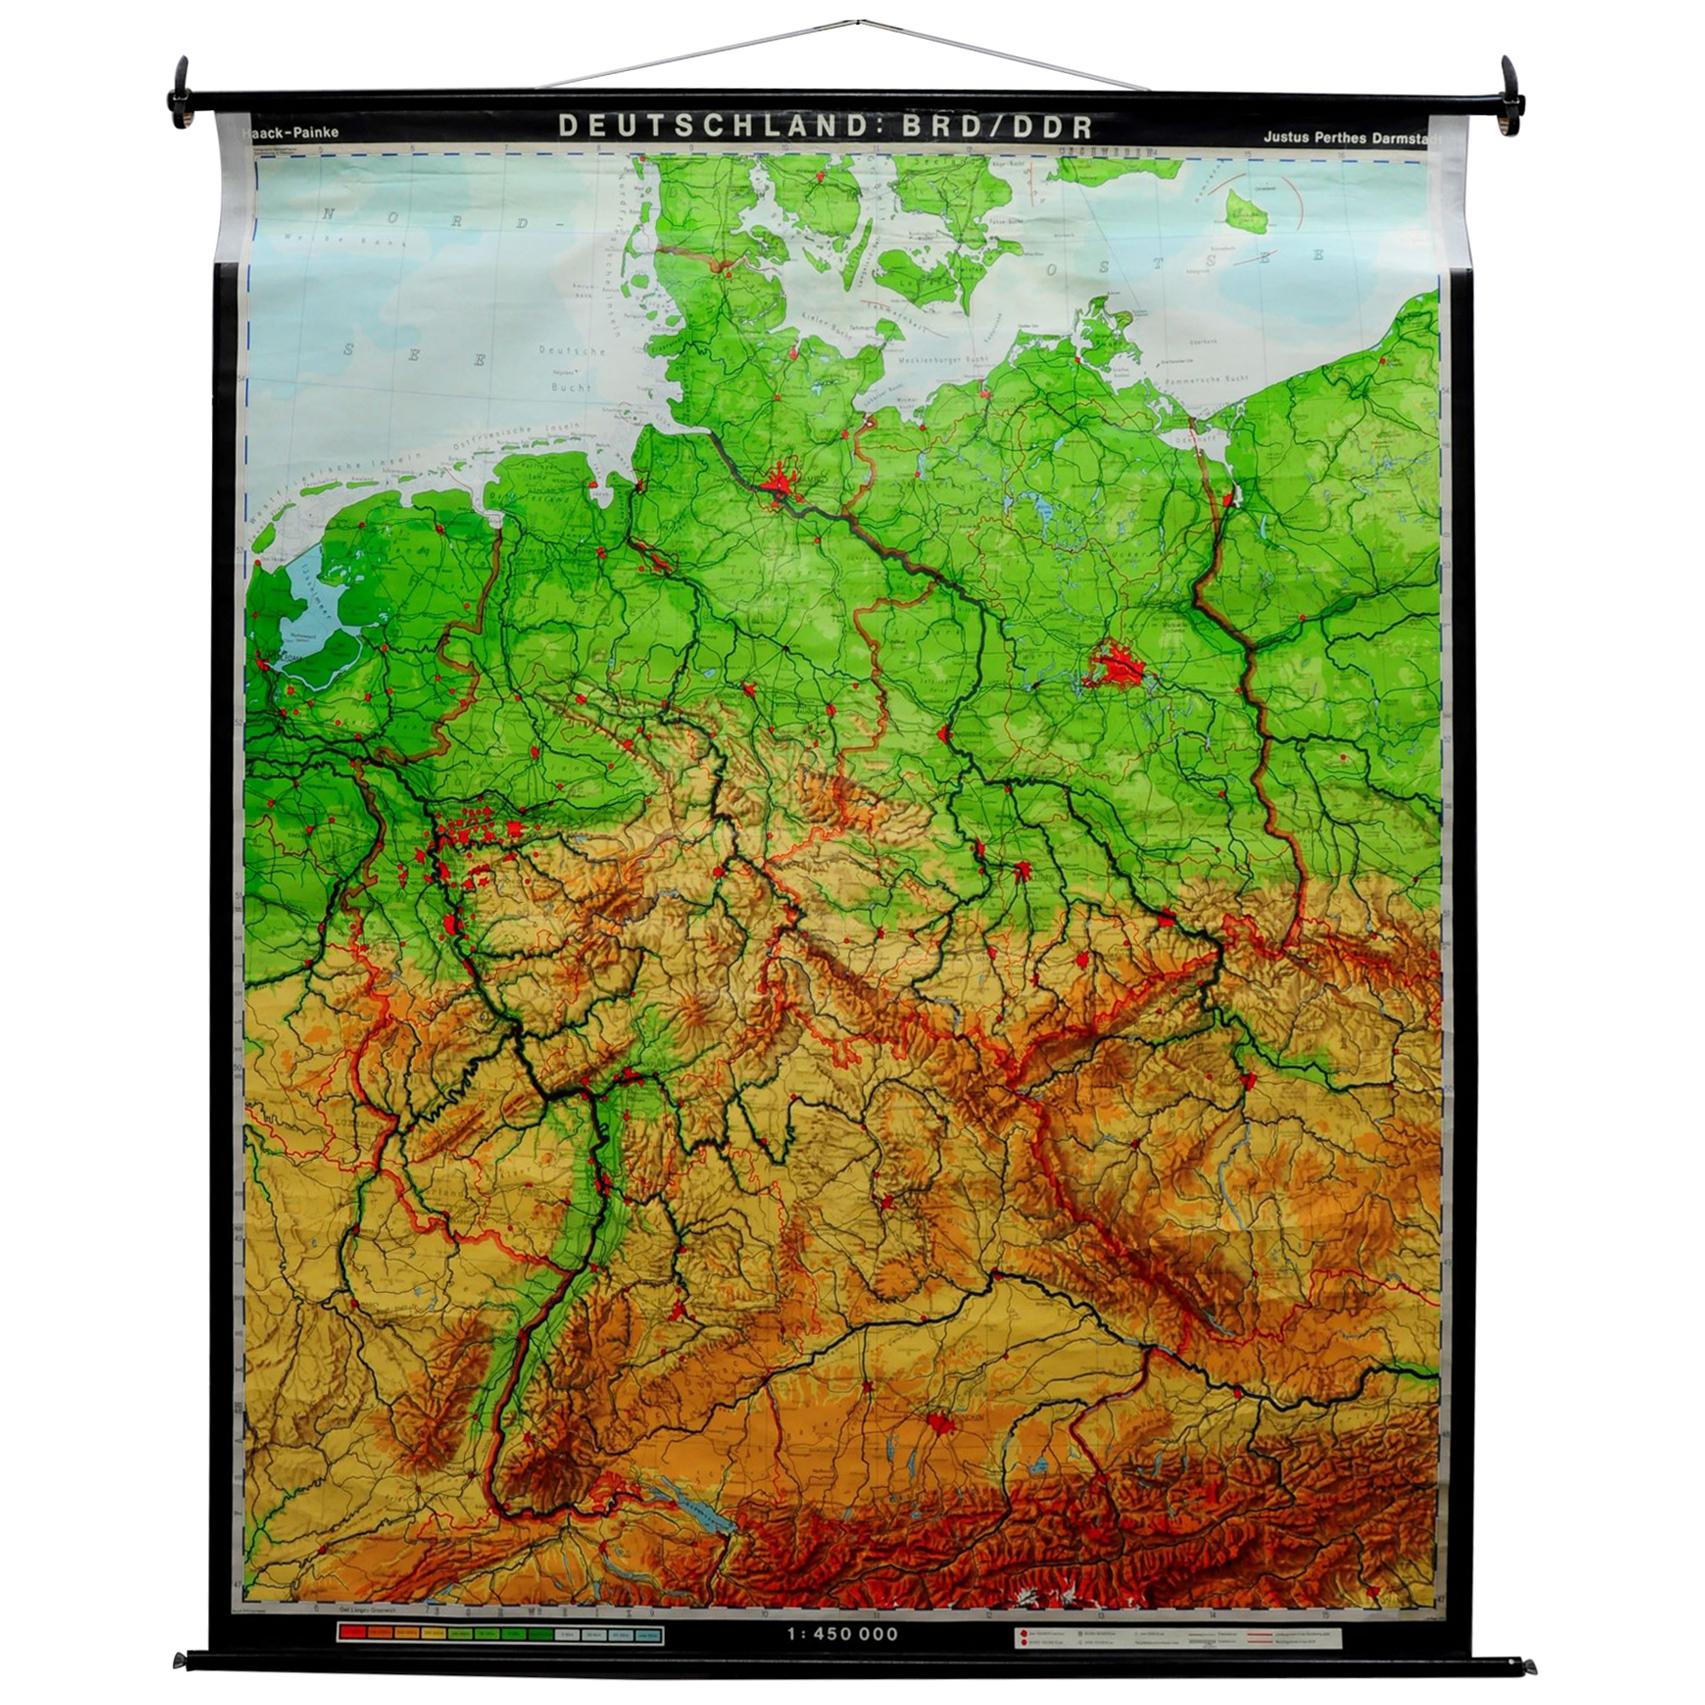 Vintage Pull-Down Map Germany BRD / DDR History Wall Chart